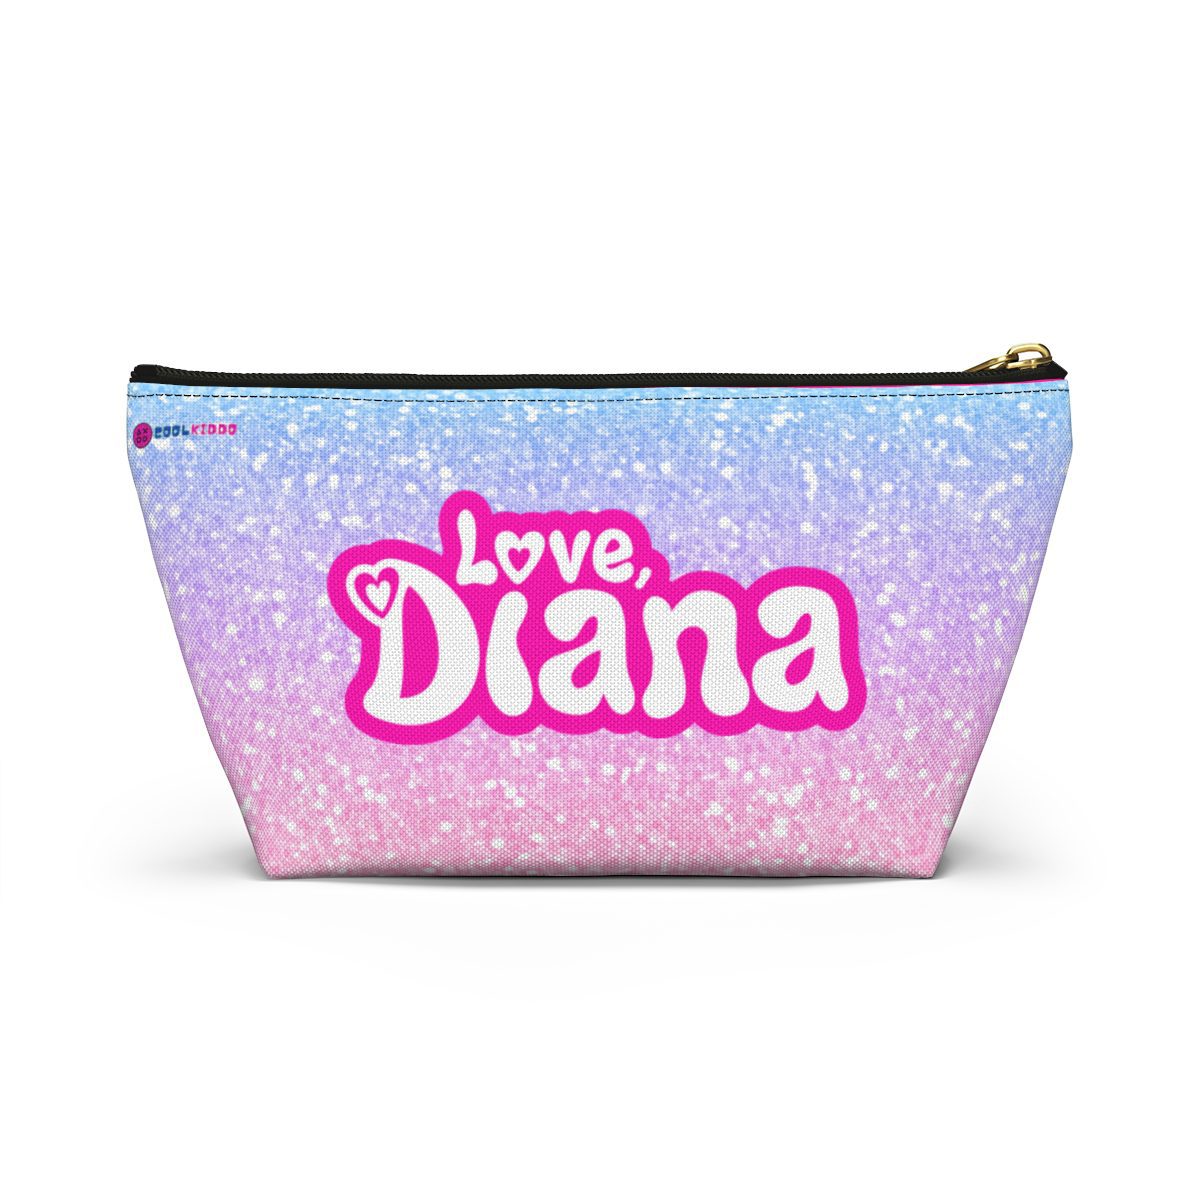 Love Diana Show YouTube Channel Accessory Pouch Cool Kiddo 24